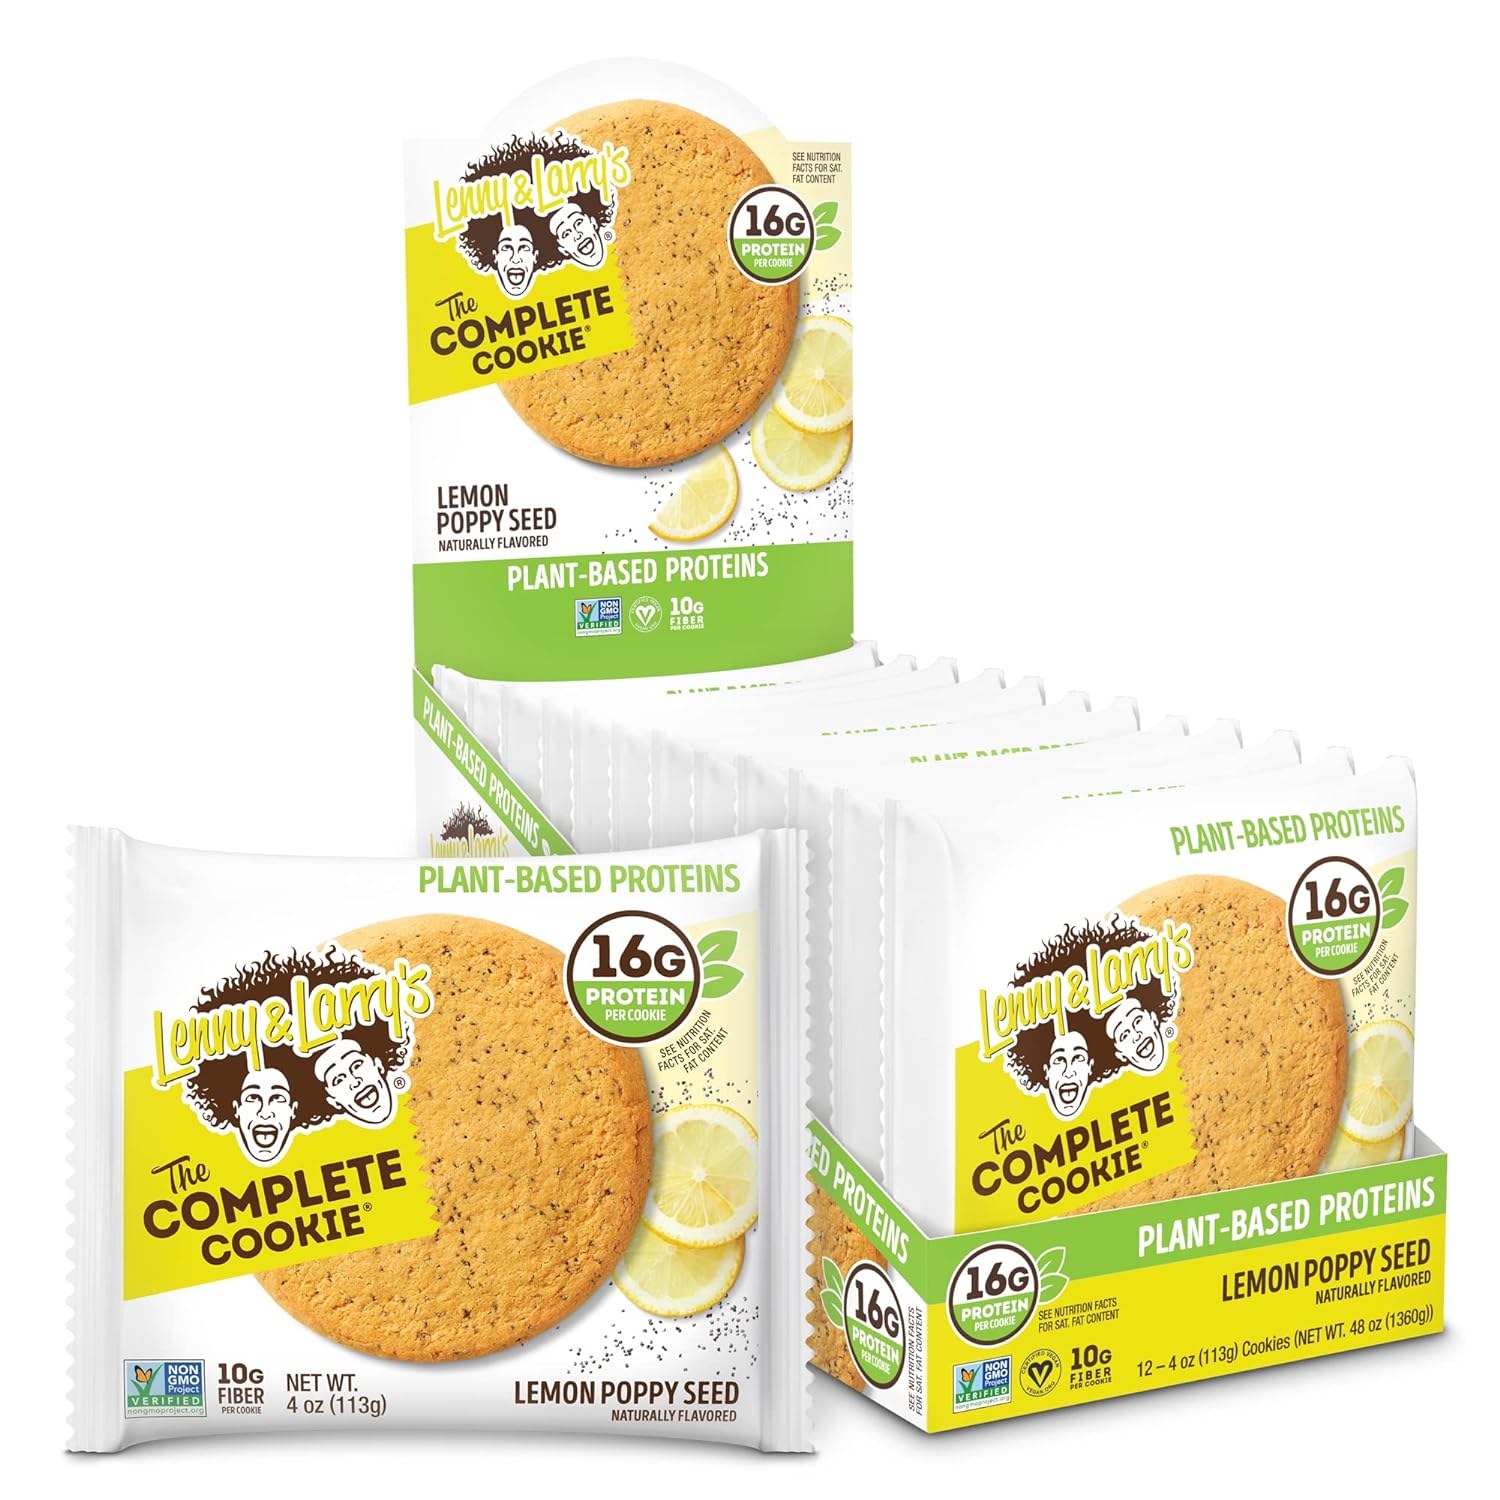 Lenny & Larry's The Complete Cookie, Lemon Poppy Seed, Soft Baked, 16g Plant Protein, Vegan, Non-GMO, 4 Ounce Cookie (Pack of 12)